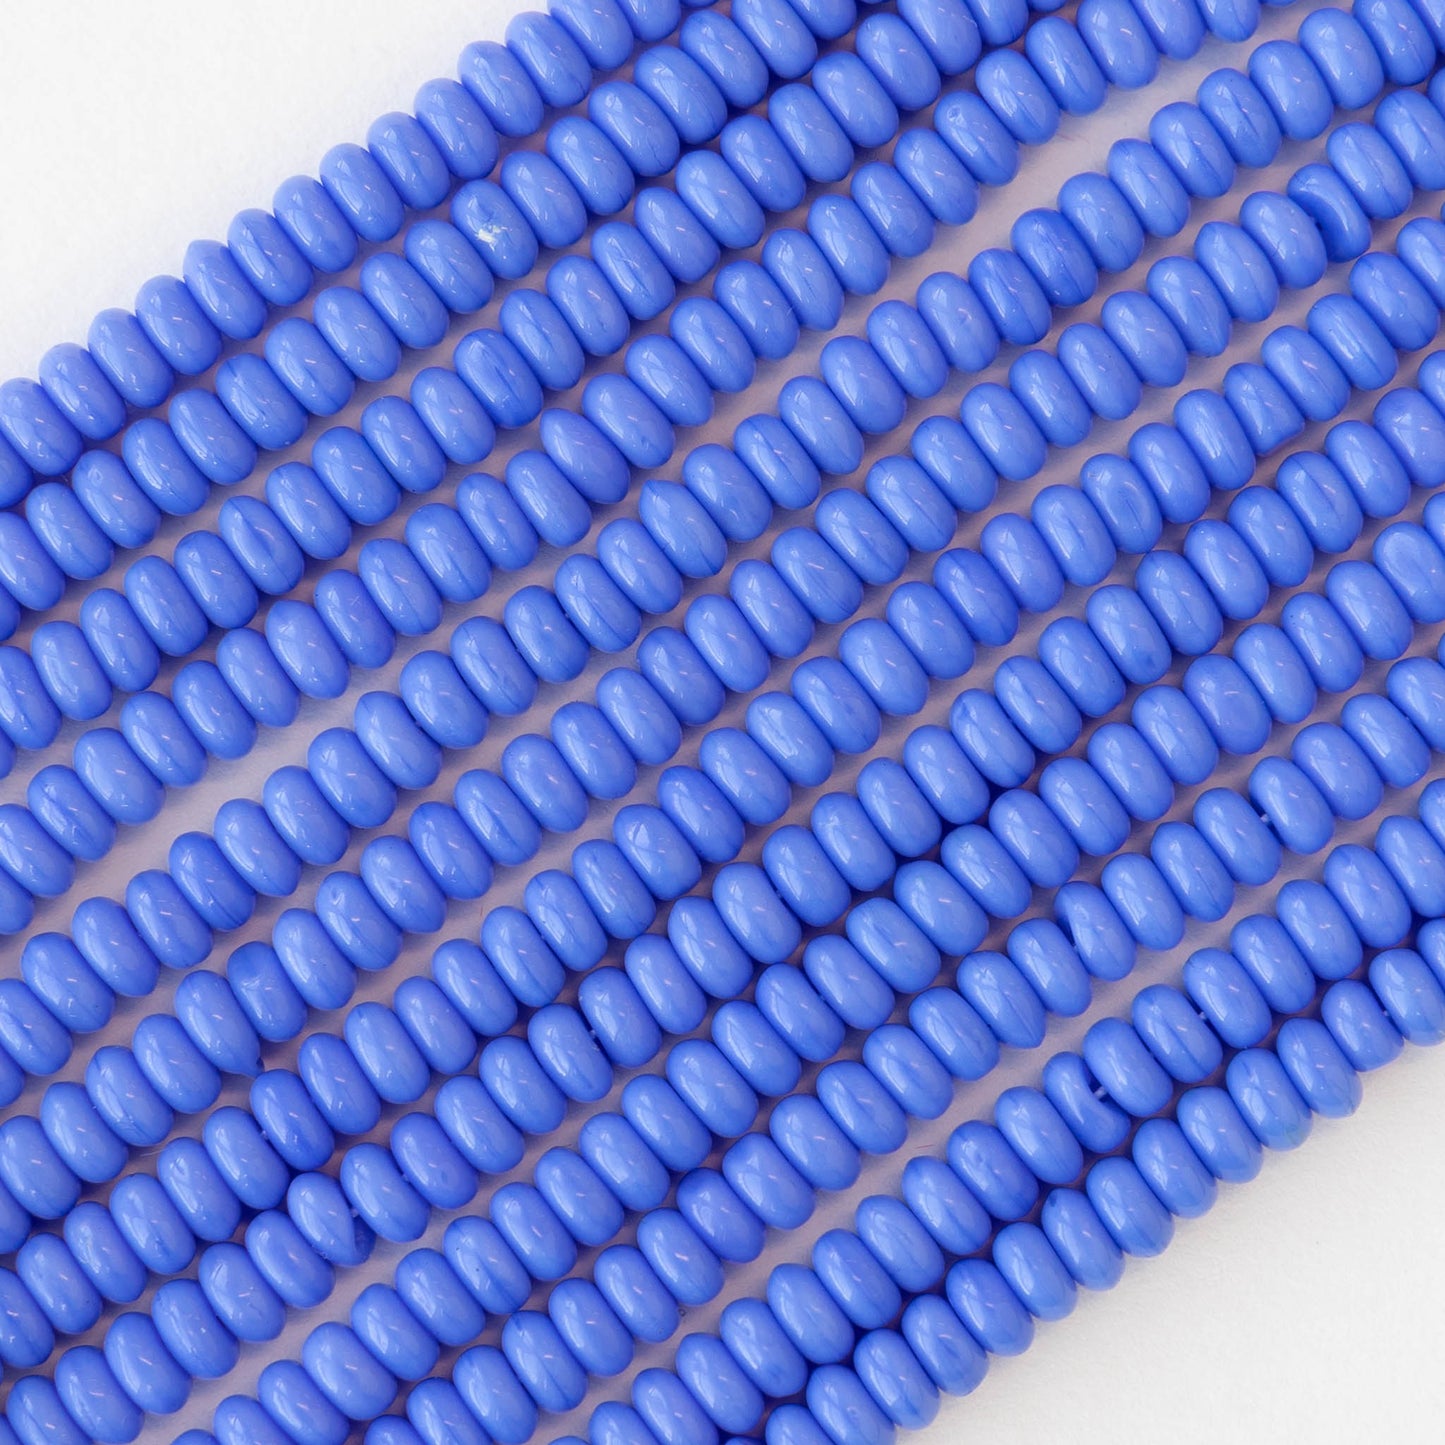 Load image into Gallery viewer, 4mm Glass Rondelle Beads - Opaque Periwinkle Blue - 100 Beads
